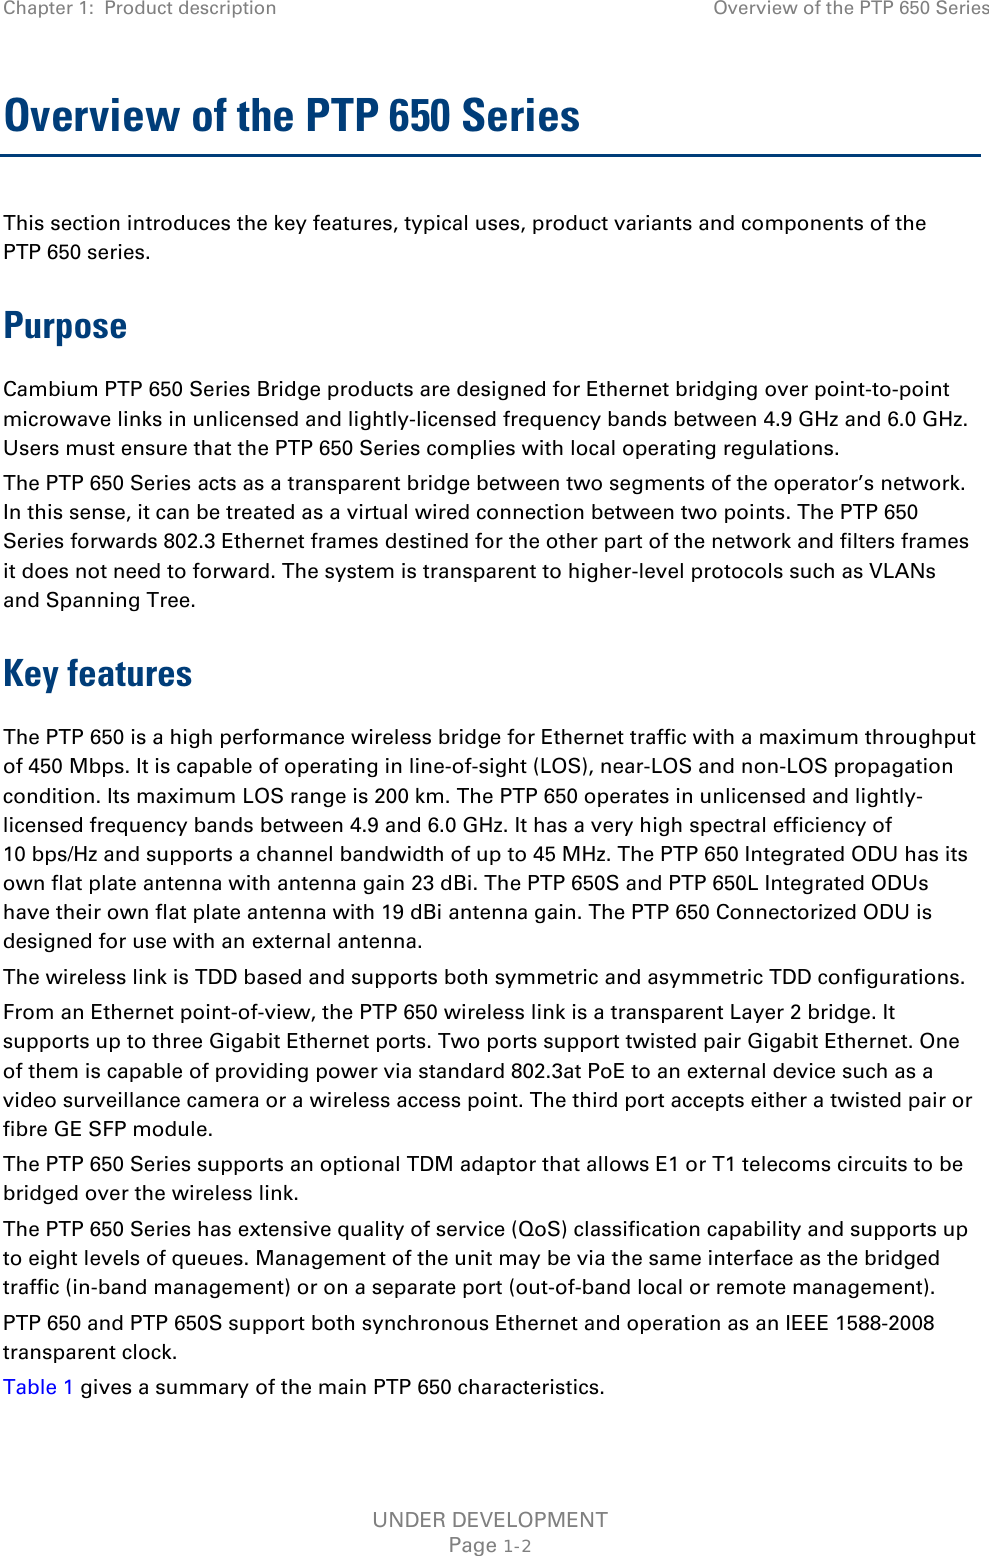 Chapter 1:  Product description Overview of the PTP 650 Series  Overview of the PTP 650 Series This section introduces the key features, typical uses, product variants and components of the PTP 650 series. Purpose Cambium PTP 650 Series Bridge products are designed for Ethernet bridging over point-to-point microwave links in unlicensed and lightly-licensed frequency bands between 4.9 GHz and 6.0 GHz. Users must ensure that the PTP 650 Series complies with local operating regulations. The PTP 650 Series acts as a transparent bridge between two segments of the operator’s network. In this sense, it can be treated as a virtual wired connection between two points. The PTP 650 Series forwards 802.3 Ethernet frames destined for the other part of the network and filters frames it does not need to forward. The system is transparent to higher-level protocols such as VLANs and Spanning Tree. Key features The PTP 650 is a high performance wireless bridge for Ethernet traffic with a maximum throughput of 450 Mbps. It is capable of operating in line-of-sight (LOS), near-LOS and non-LOS propagation condition. Its maximum LOS range is 200 km. The PTP 650 operates in unlicensed and lightly-licensed frequency bands between 4.9 and 6.0 GHz. It has a very high spectral efficiency of 10 bps/Hz and supports a channel bandwidth of up to 45 MHz. The PTP 650 Integrated ODU has its own flat plate antenna with antenna gain 23 dBi. The PTP 650S and PTP 650L Integrated ODUs have their own flat plate antenna with 19 dBi antenna gain. The PTP 650 Connectorized ODU is designed for use with an external antenna. The wireless link is TDD based and supports both symmetric and asymmetric TDD configurations. From an Ethernet point-of-view, the PTP 650 wireless link is a transparent Layer 2 bridge. It supports up to three Gigabit Ethernet ports. Two ports support twisted pair Gigabit Ethernet. One of them is capable of providing power via standard 802.3at PoE to an external device such as a video surveillance camera or a wireless access point. The third port accepts either a twisted pair or fibre GE SFP module. The PTP 650 Series supports an optional TDM adaptor that allows E1 or T1 telecoms circuits to be bridged over the wireless link.  The PTP 650 Series has extensive quality of service (QoS) classification capability and supports up to eight levels of queues. Management of the unit may be via the same interface as the bridged traffic (in-band management) or on a separate port (out-of-band local or remote management). PTP 650 and PTP 650S support both synchronous Ethernet and operation as an IEEE 1588-2008 transparent clock. Table 1 gives a summary of the main PTP 650 characteristics.  UNDER DEVELOPMENT Page 1-2 